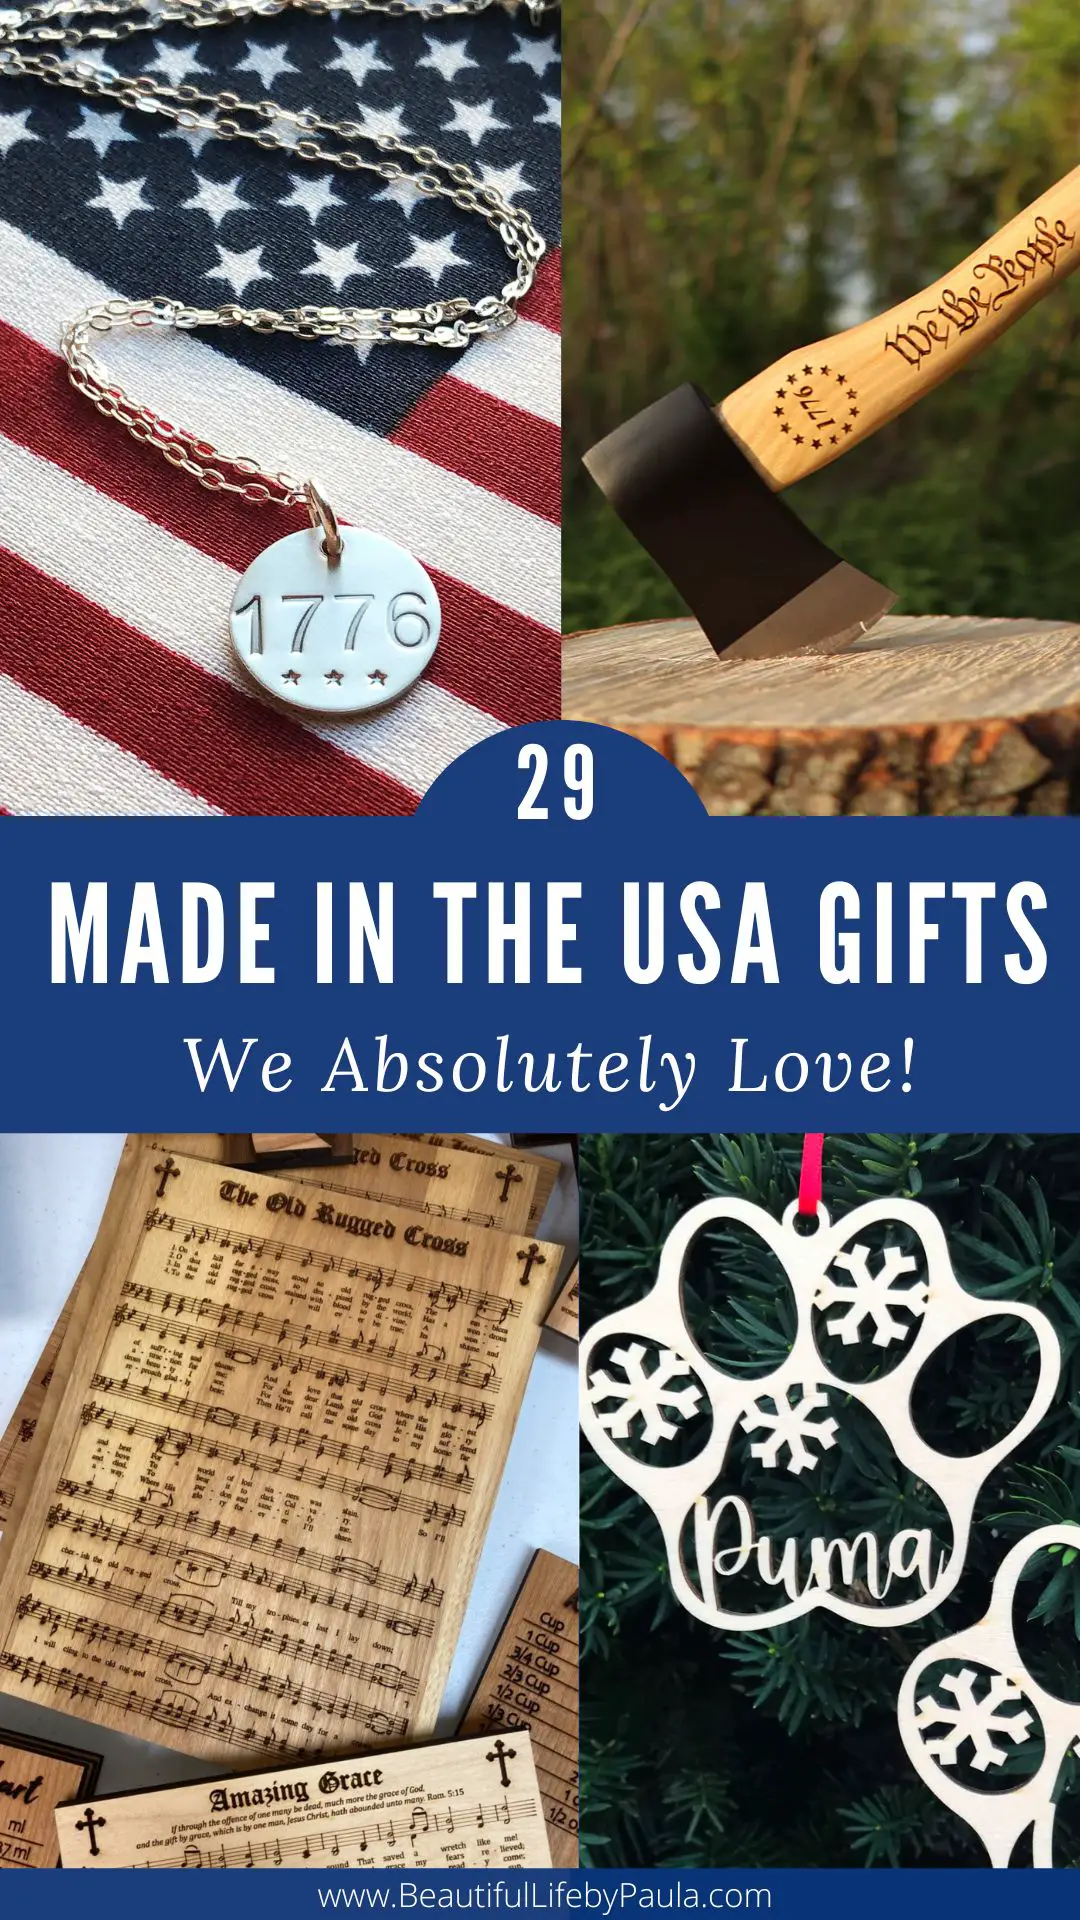 Made in USA gifts